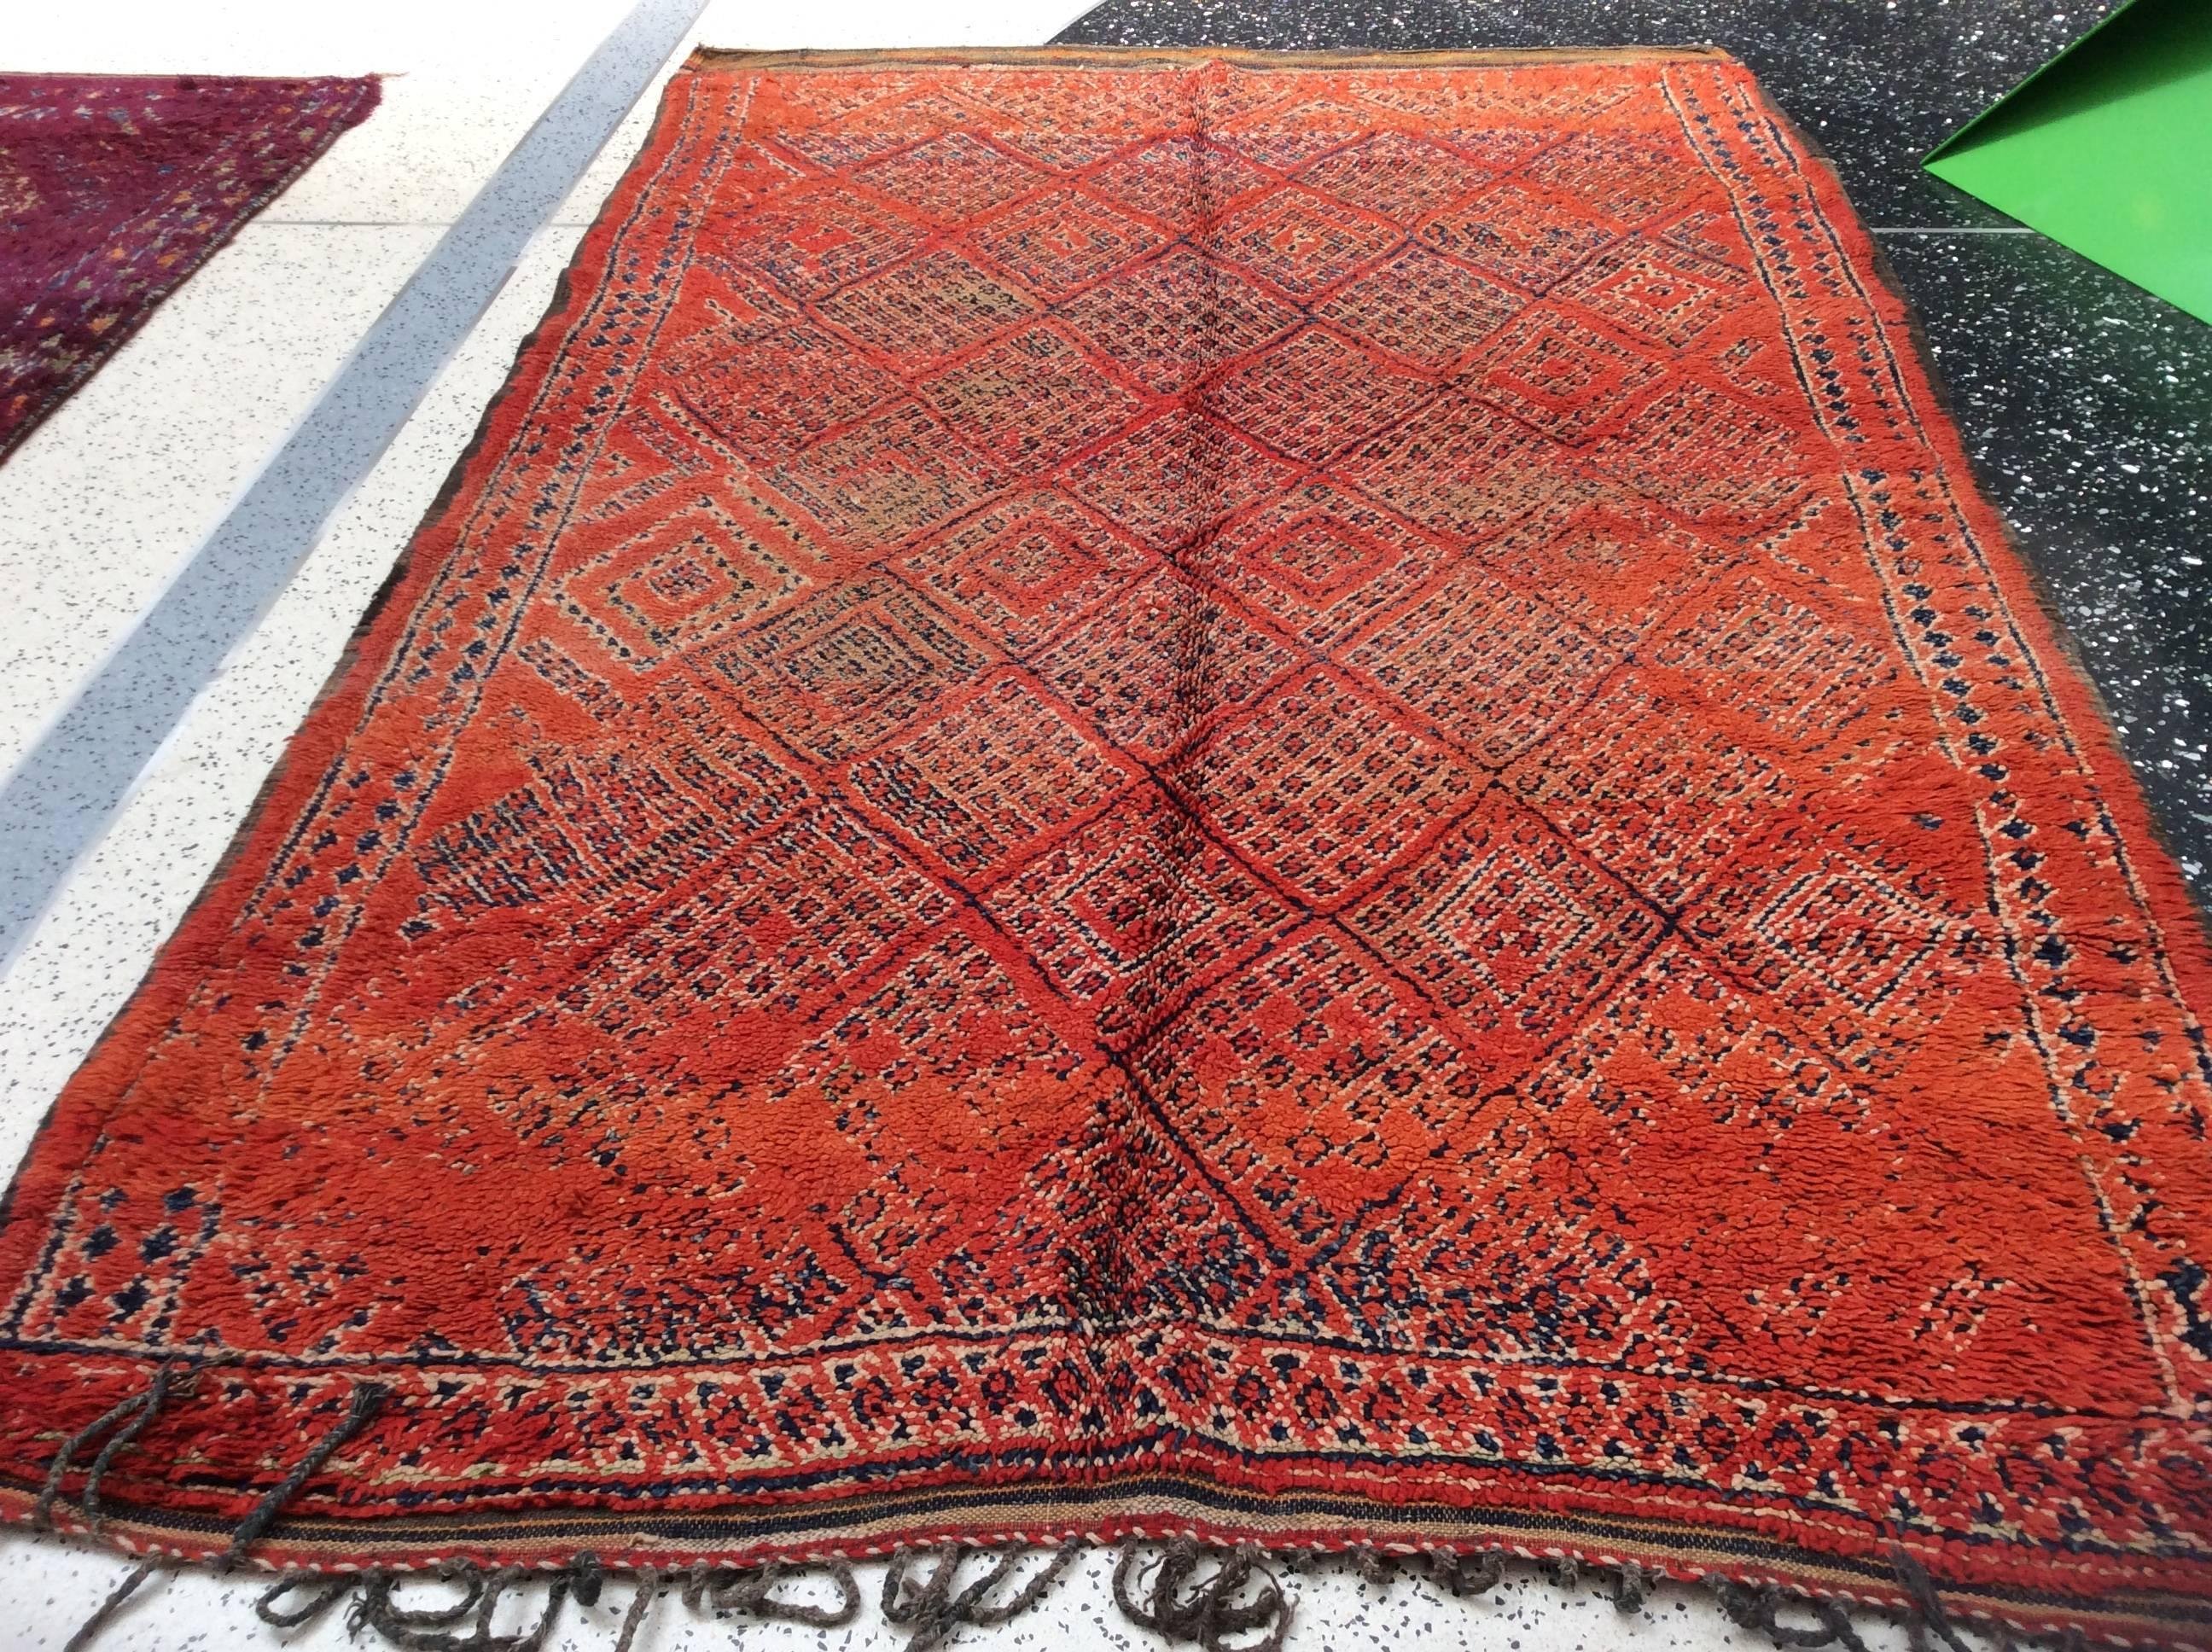 Hand-Knotted Tribal Moroccan Berber Rug